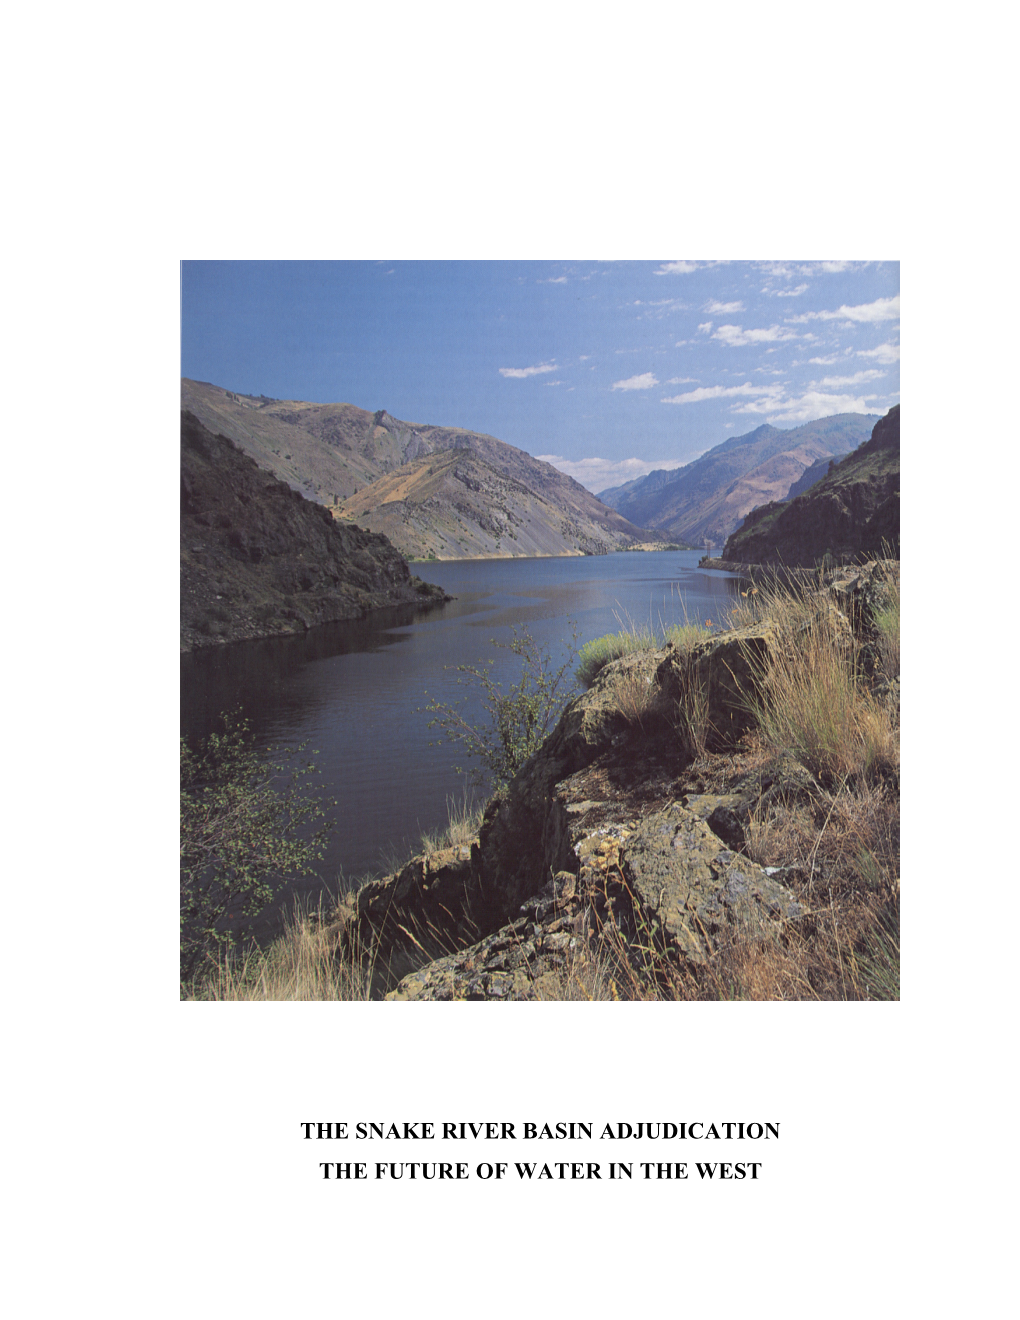 The Snake River Basin Adjudication the Future of Water in the West